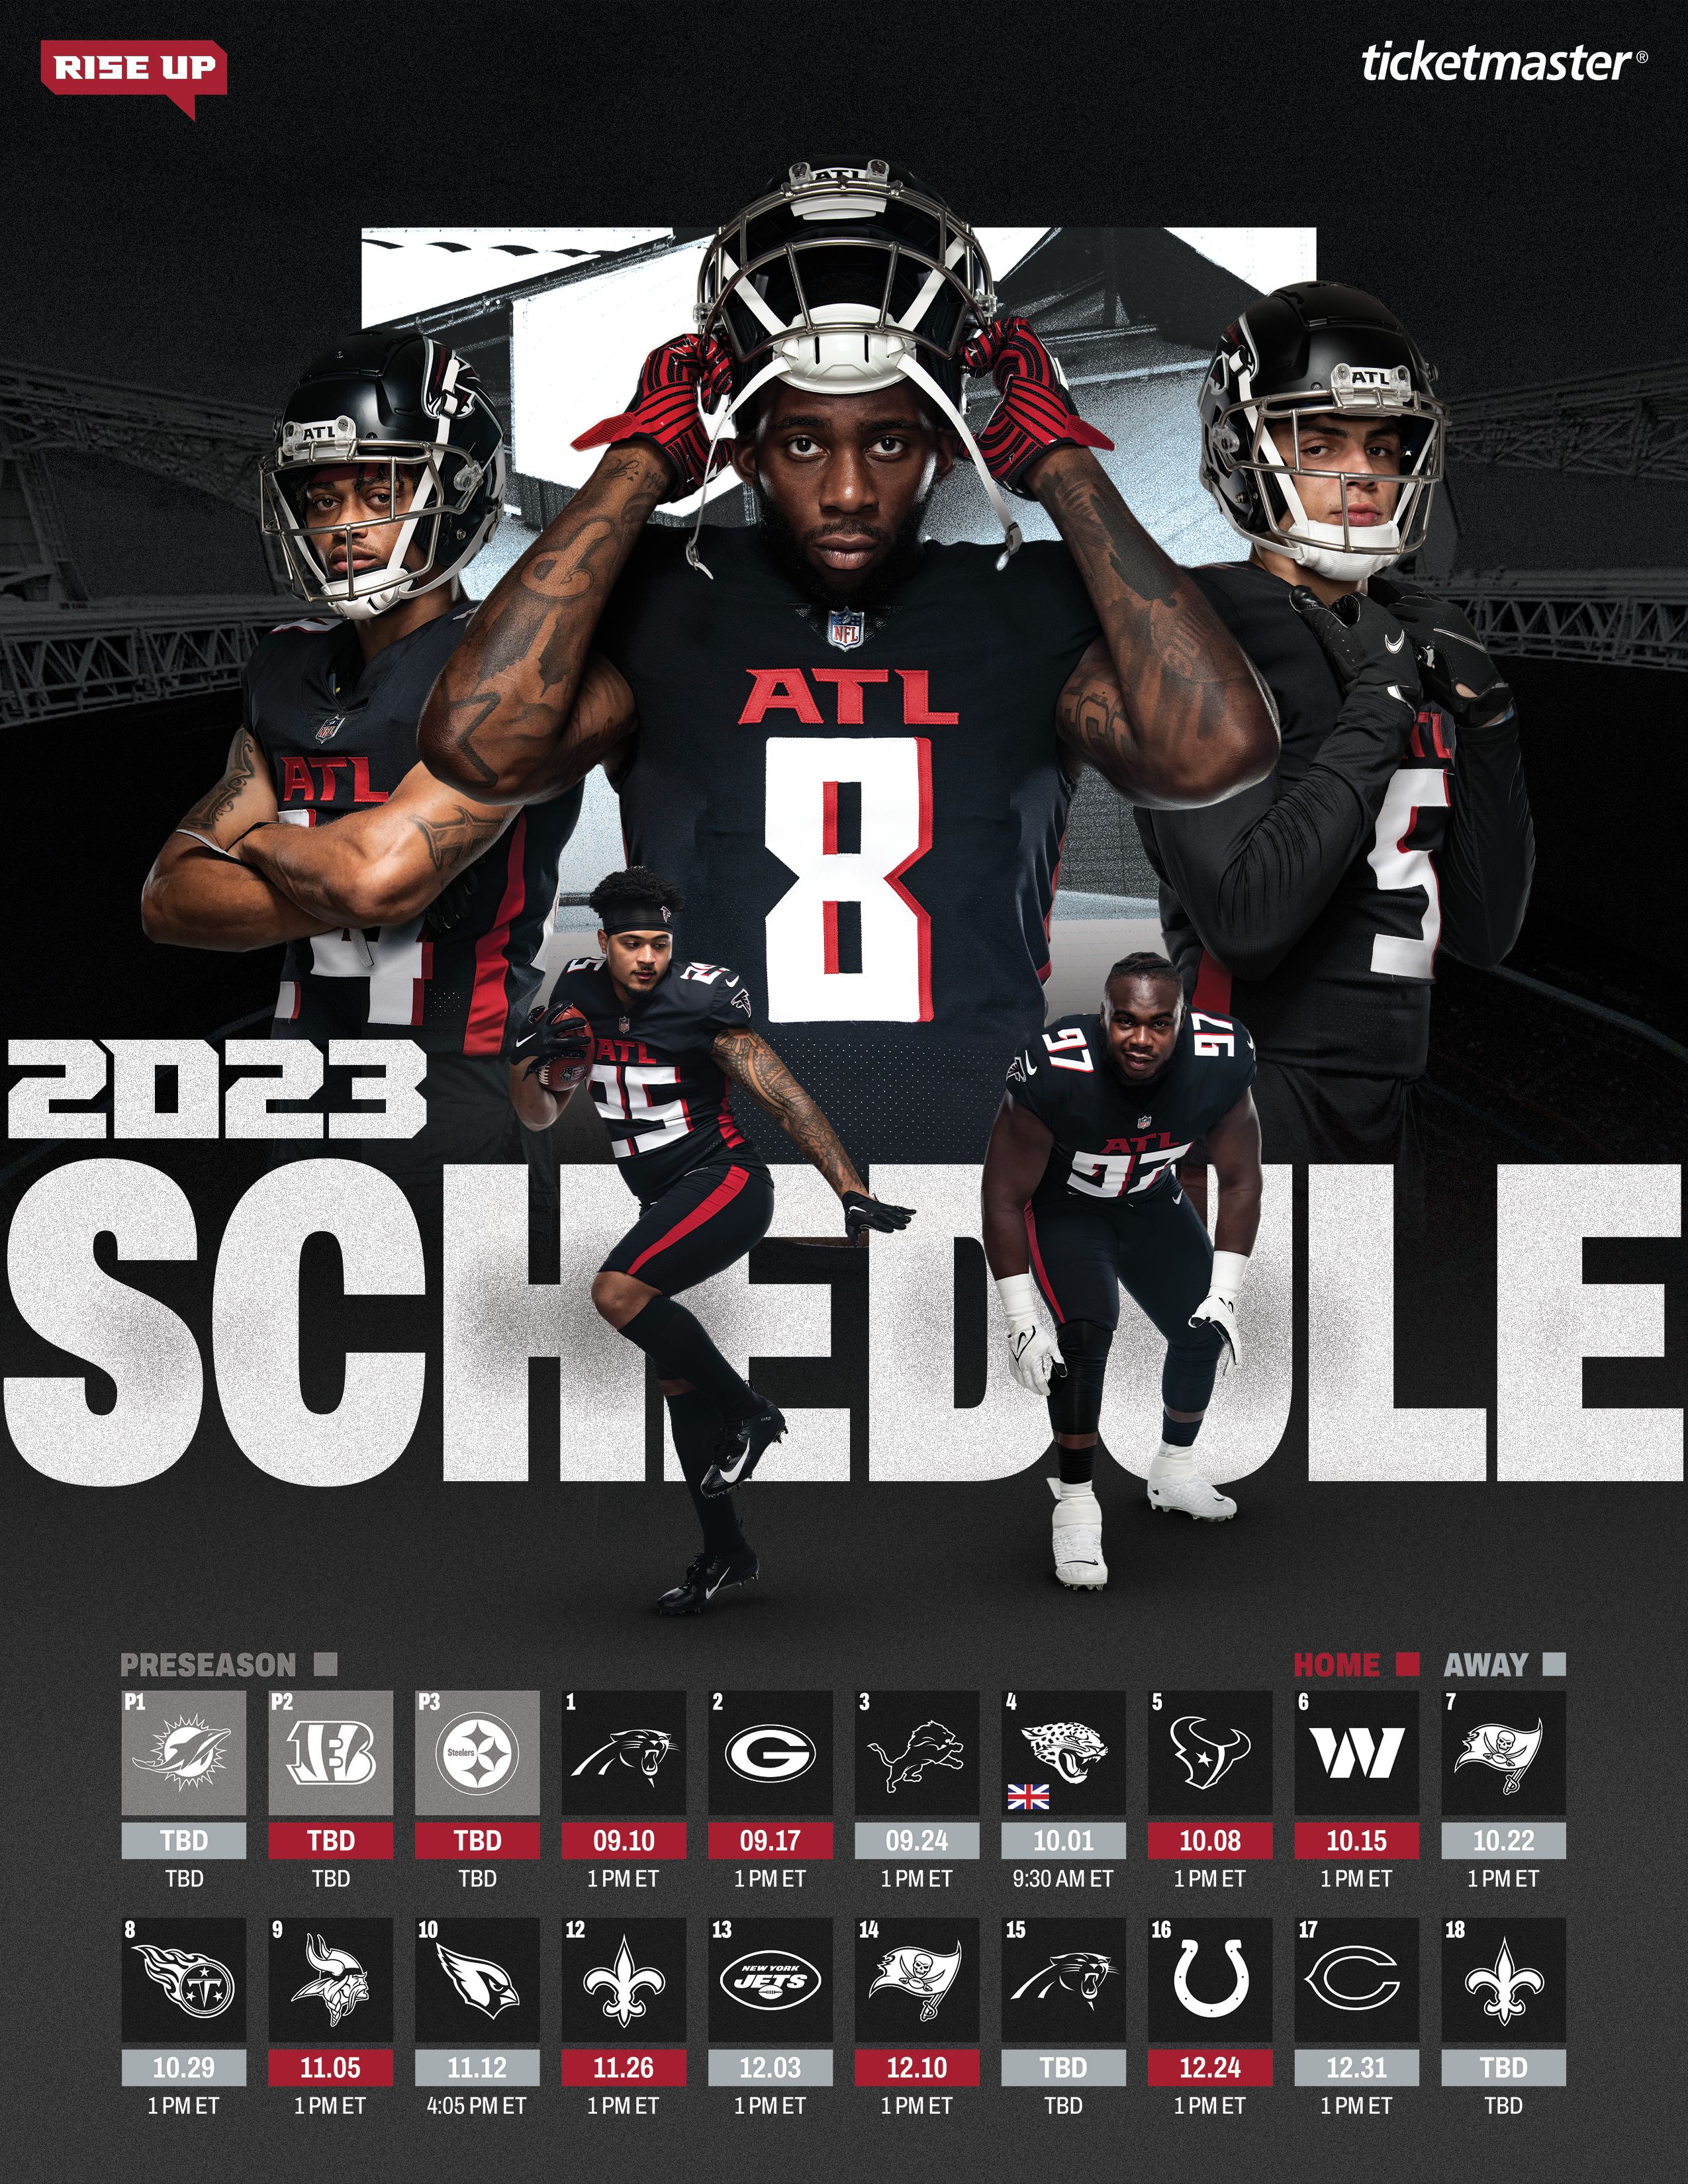 show me the falcons schedule